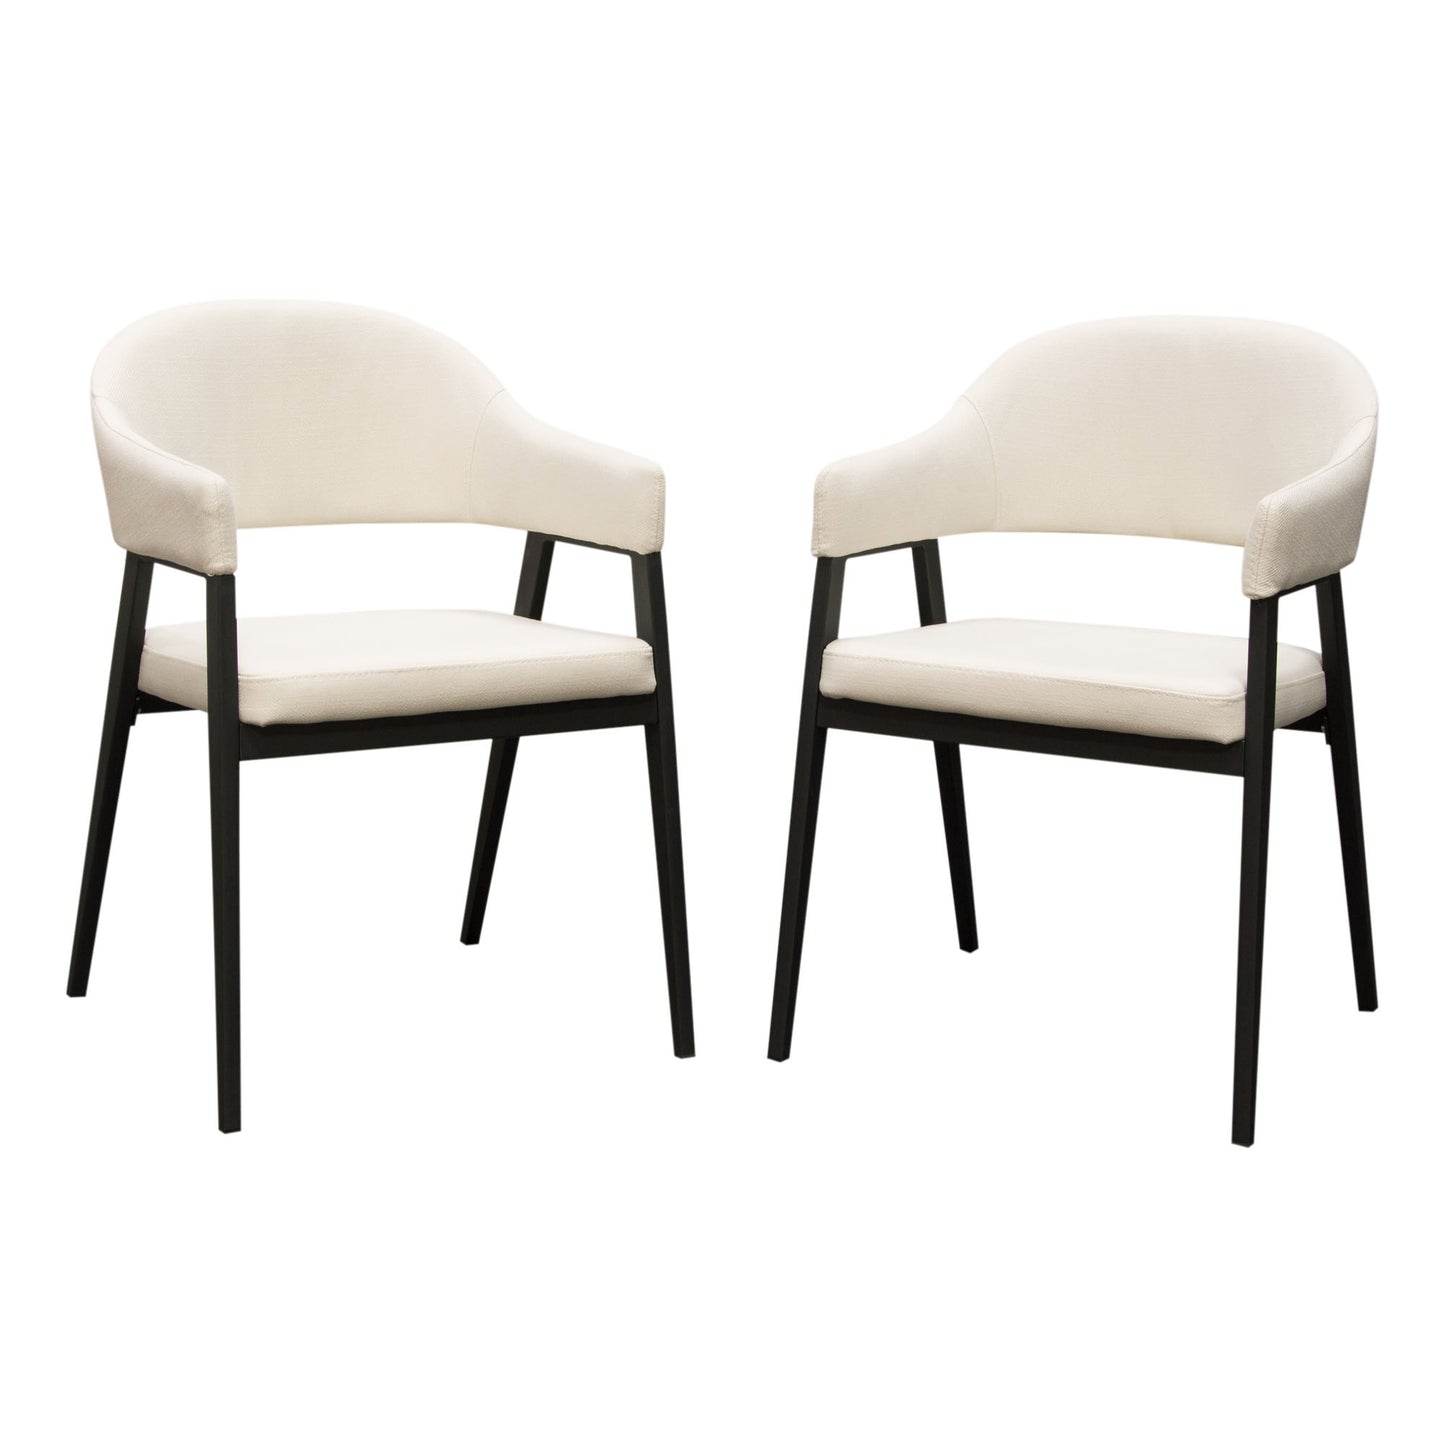 Adele Set of Two Dining/Accent Chairs in Cream Fabric w/ Black Powder Coated Metal Frame by Diamond Sofa